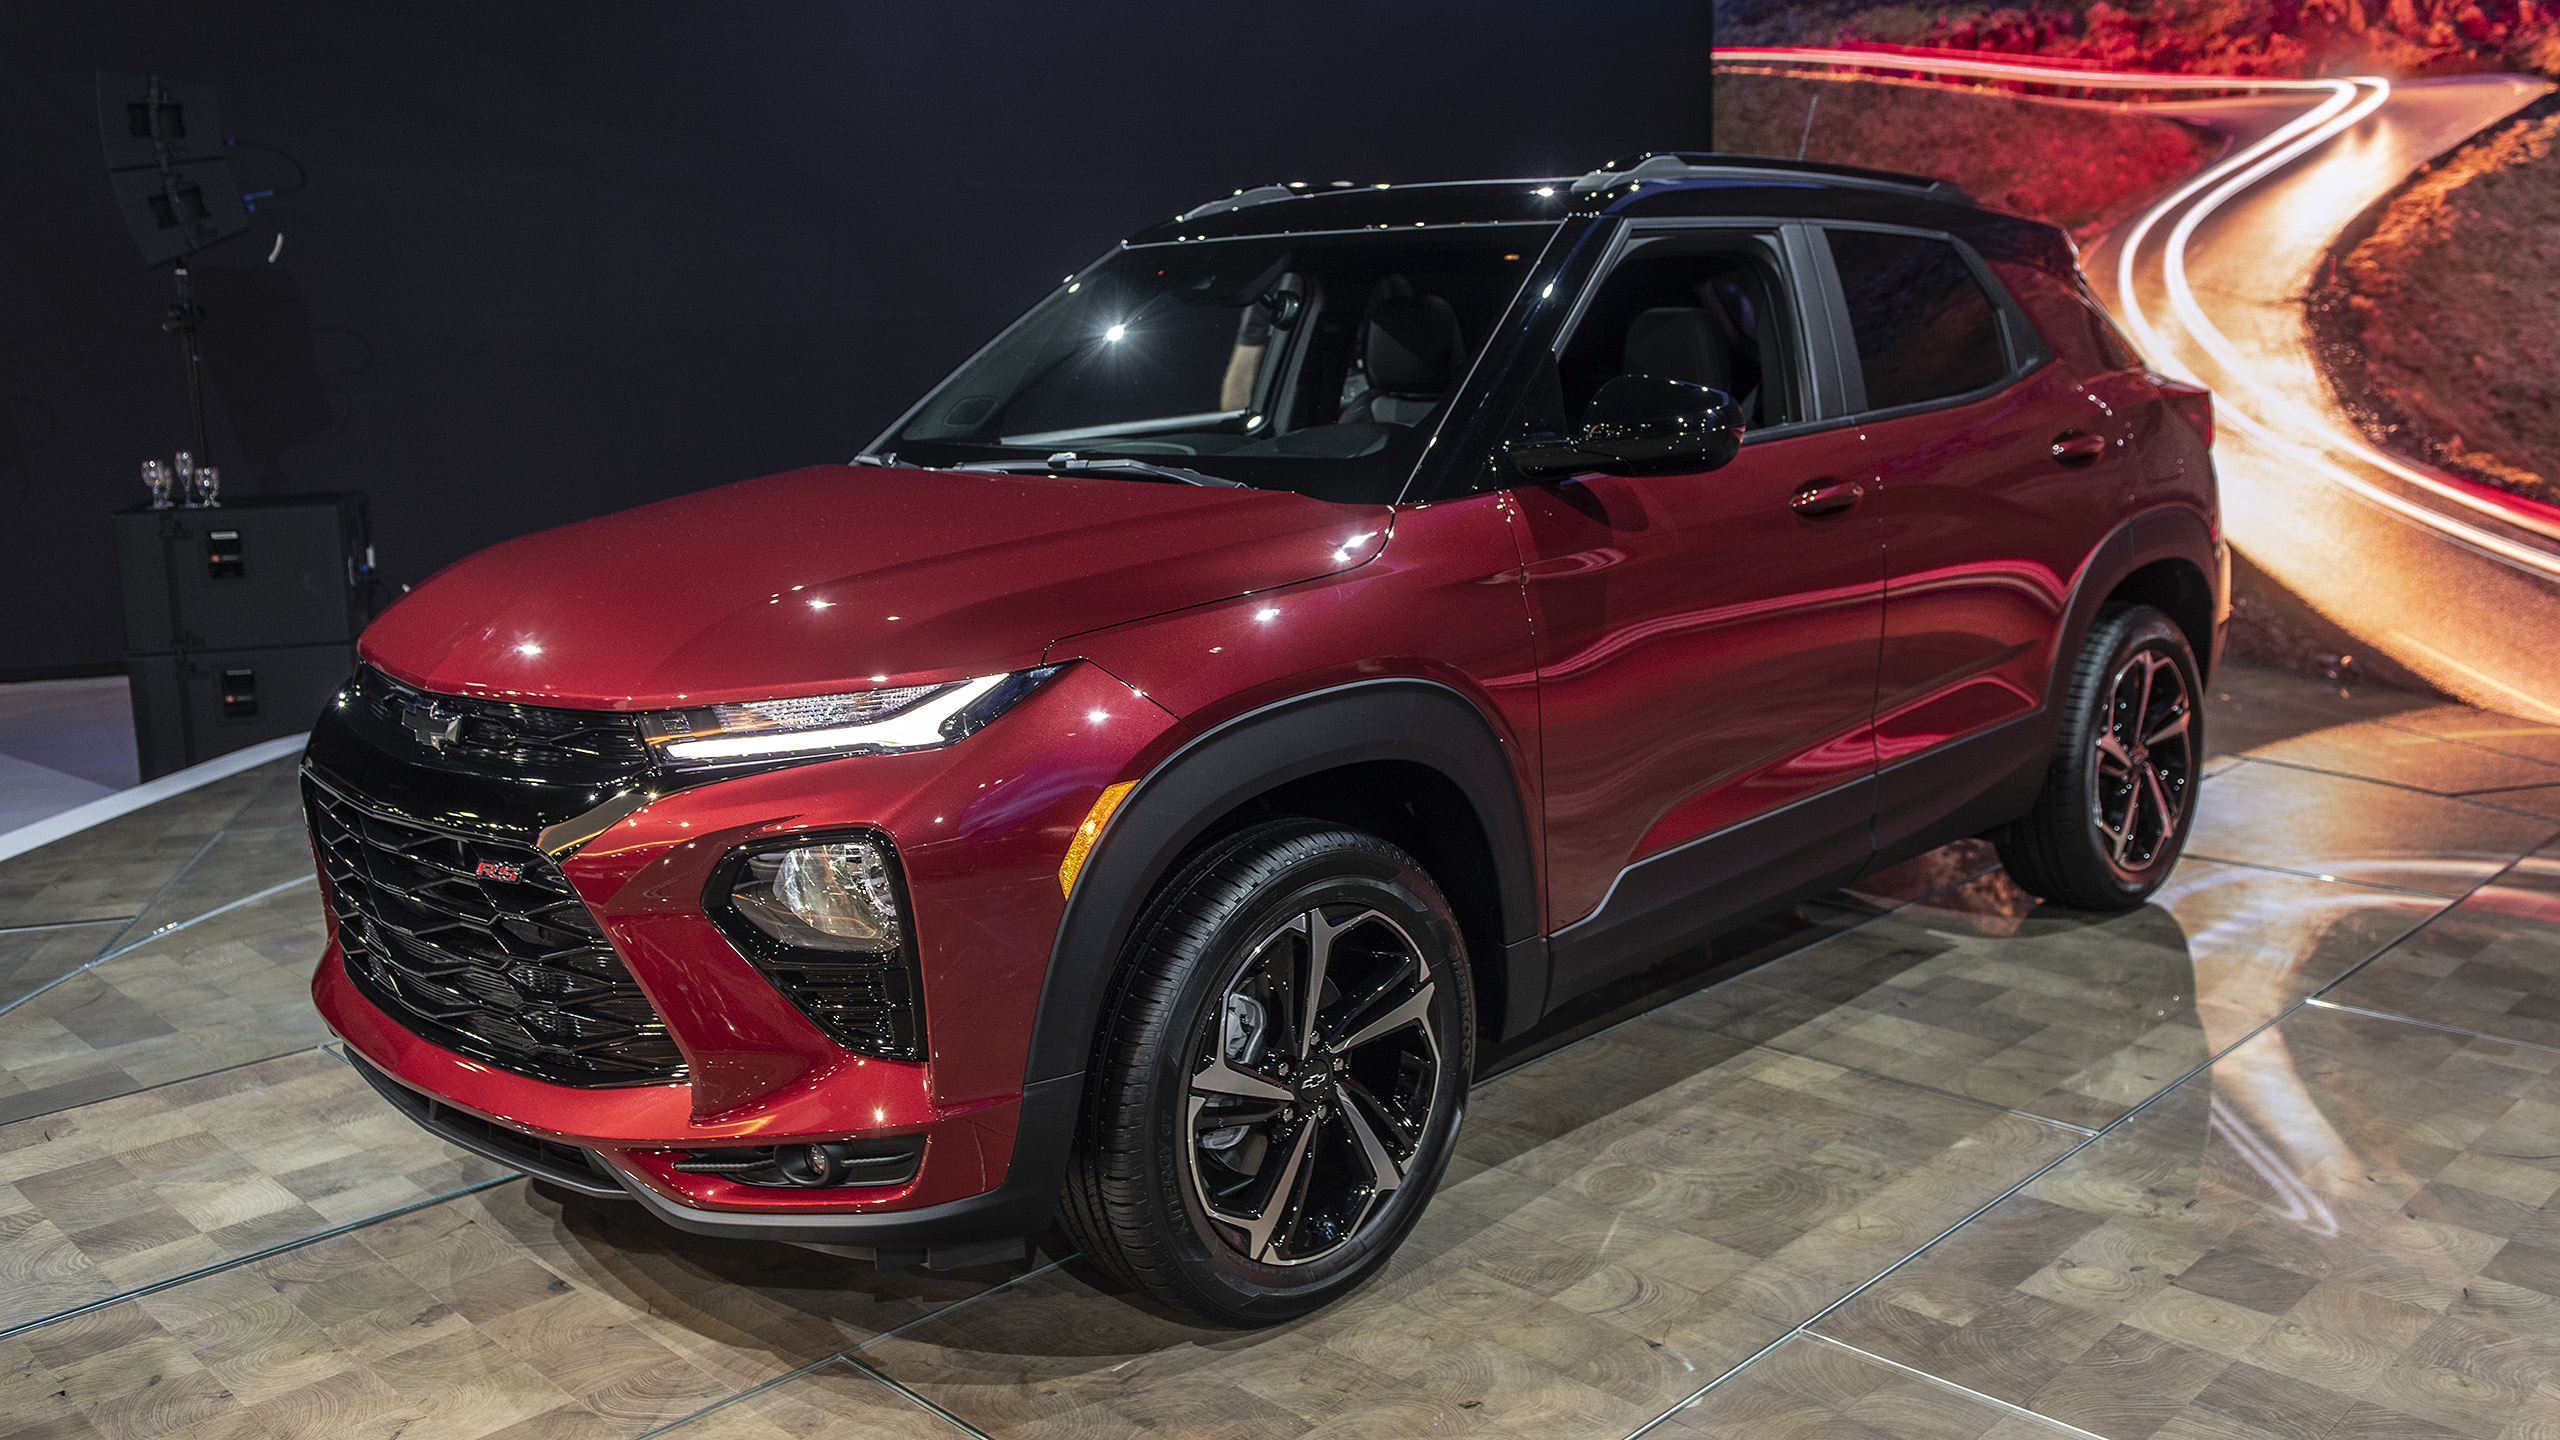 2021 Chevy Trailblazer pricing outlined for its 5 trim levels - Autoblog